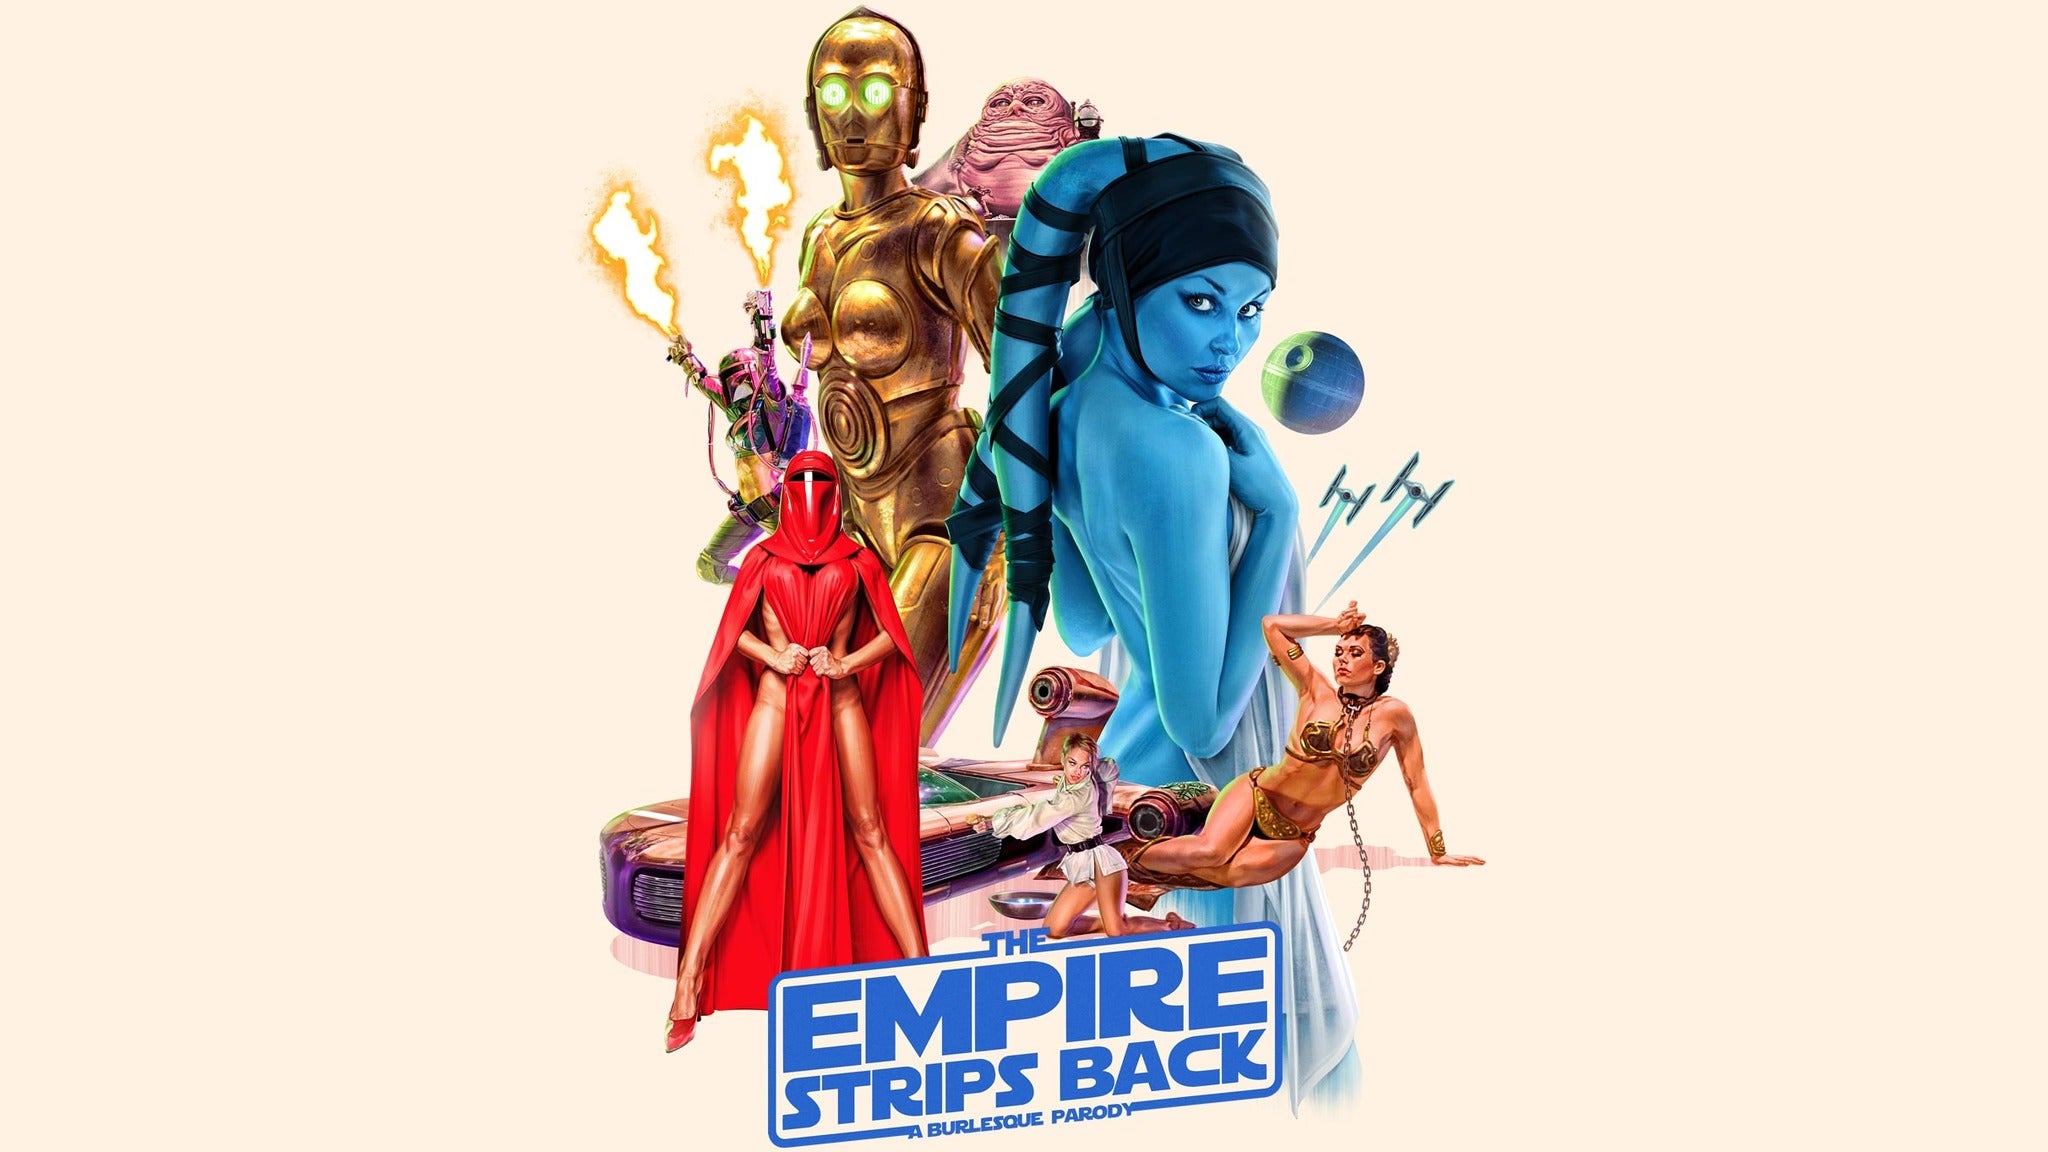 The Empire Strips Back: A Burlesque Parody in Cleveland promo photo for Live Nation presale offer code